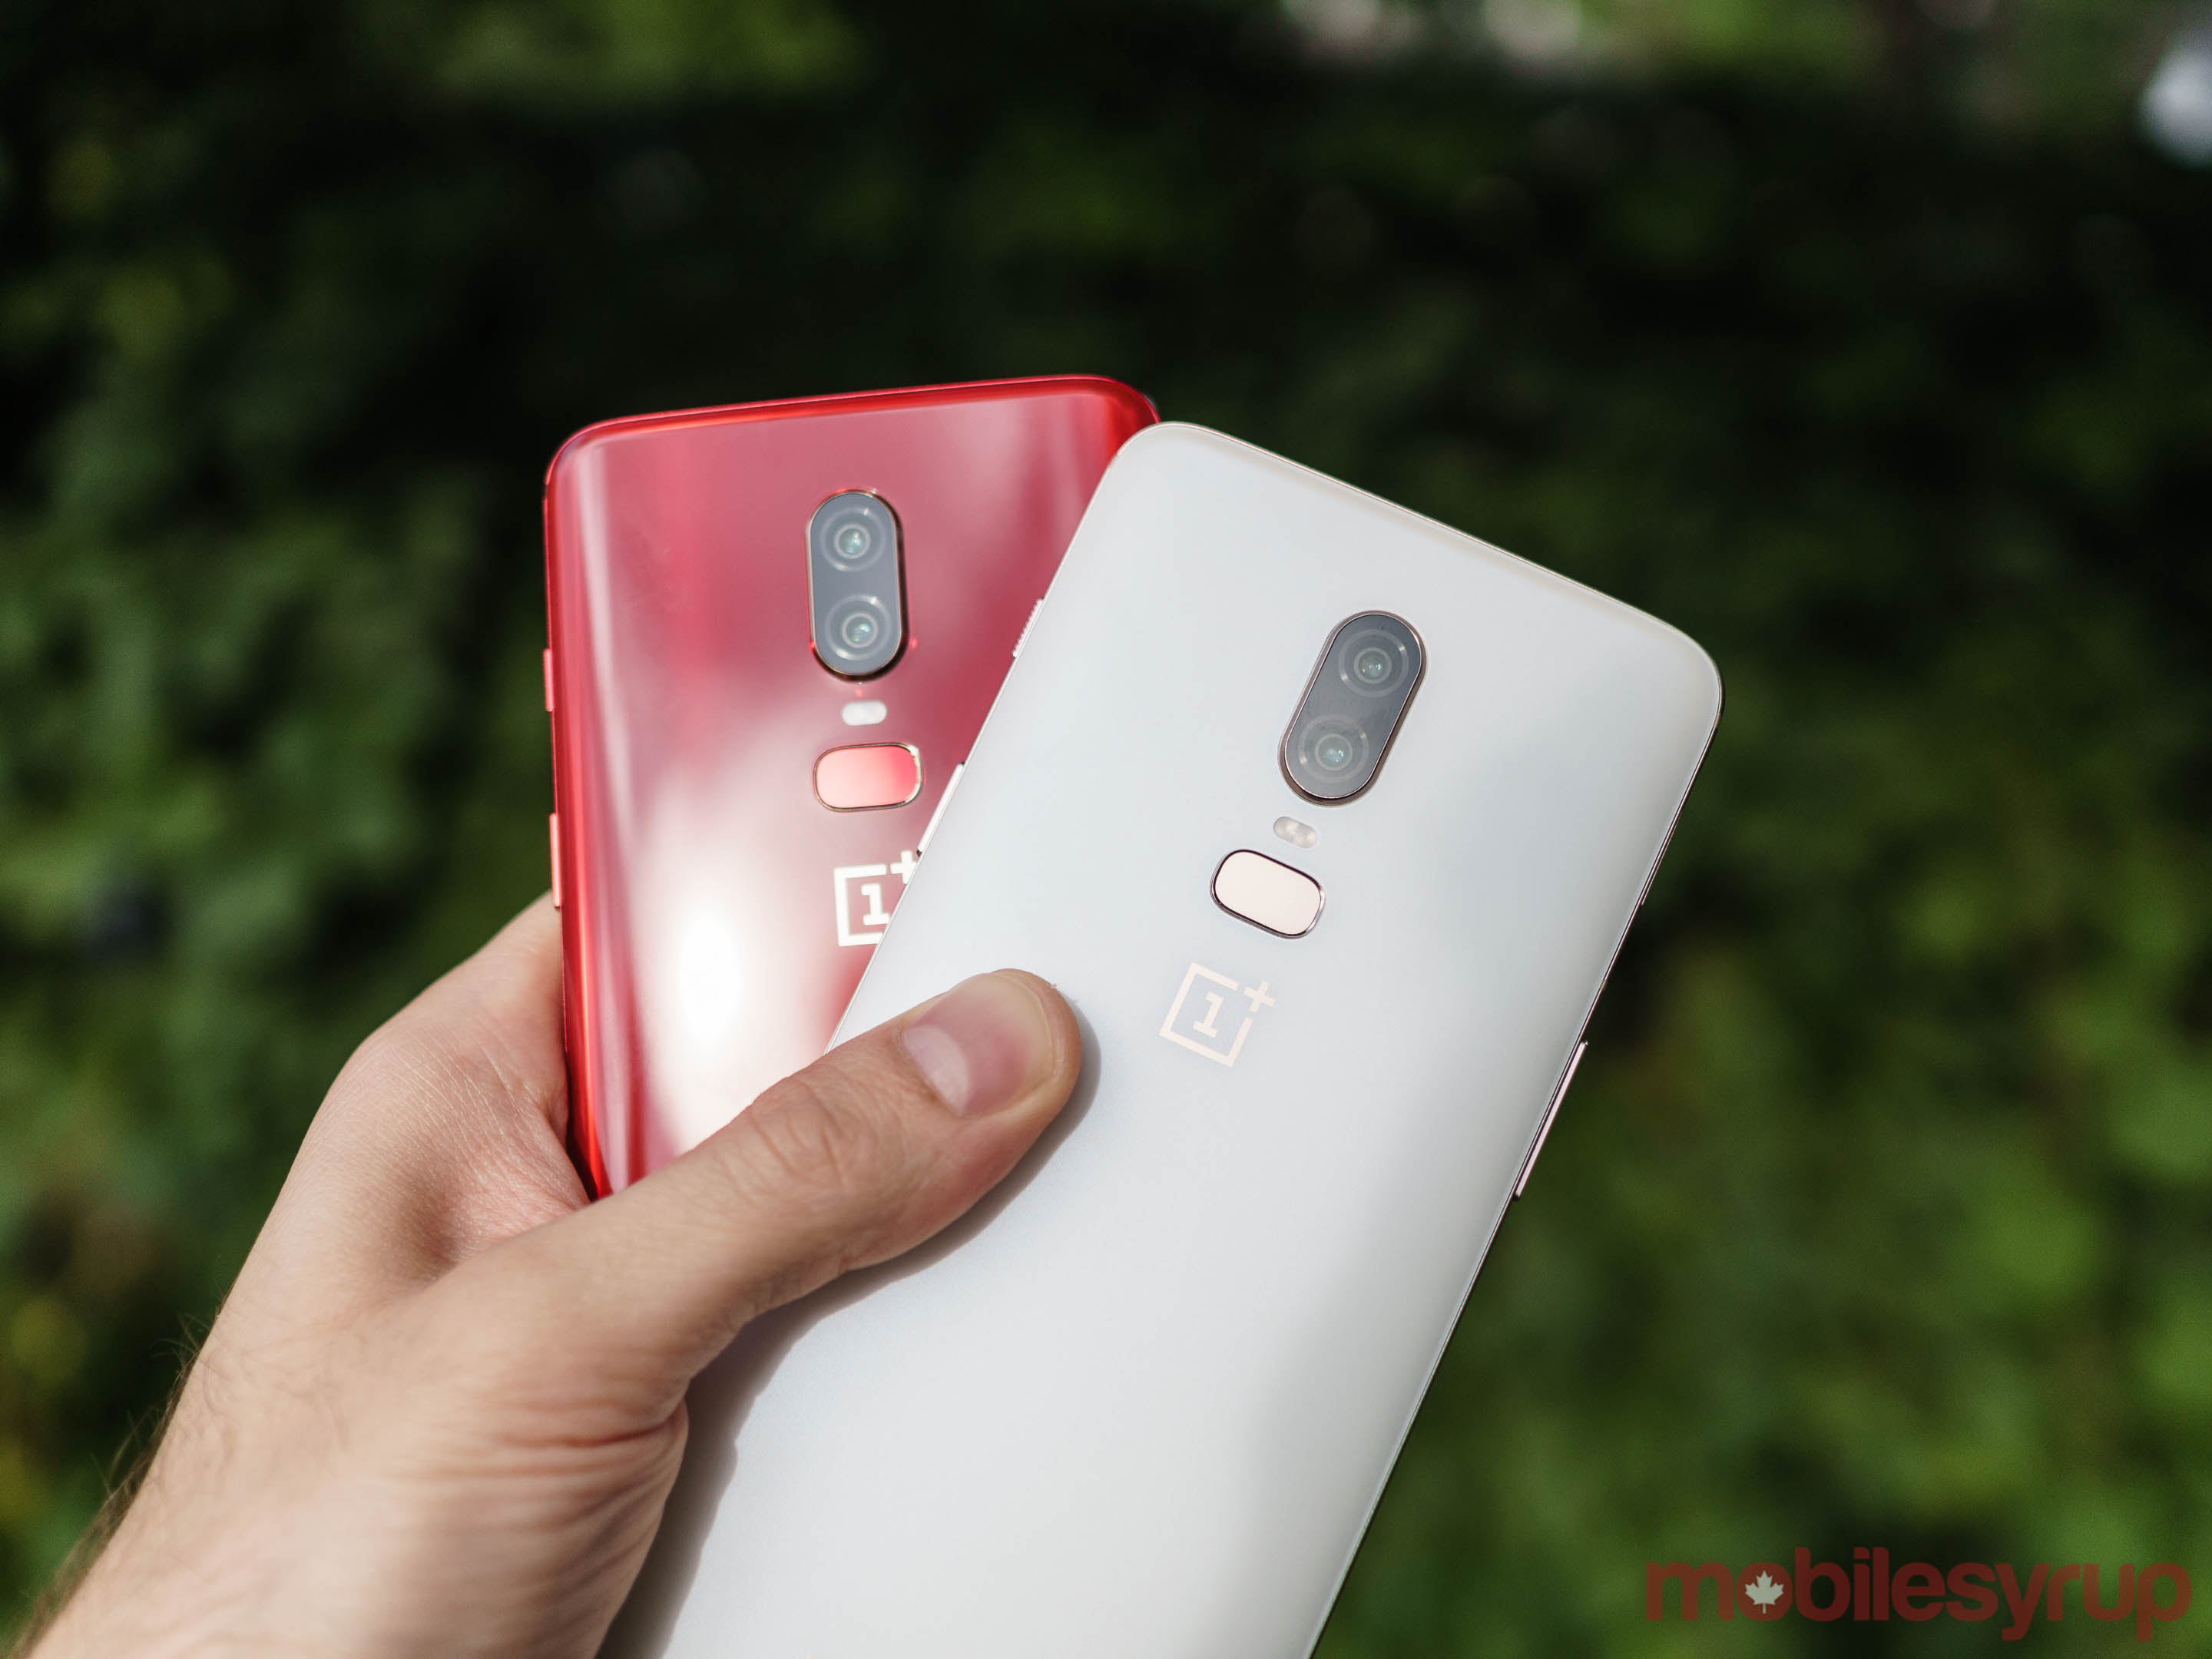 OnePlus 6 models compared